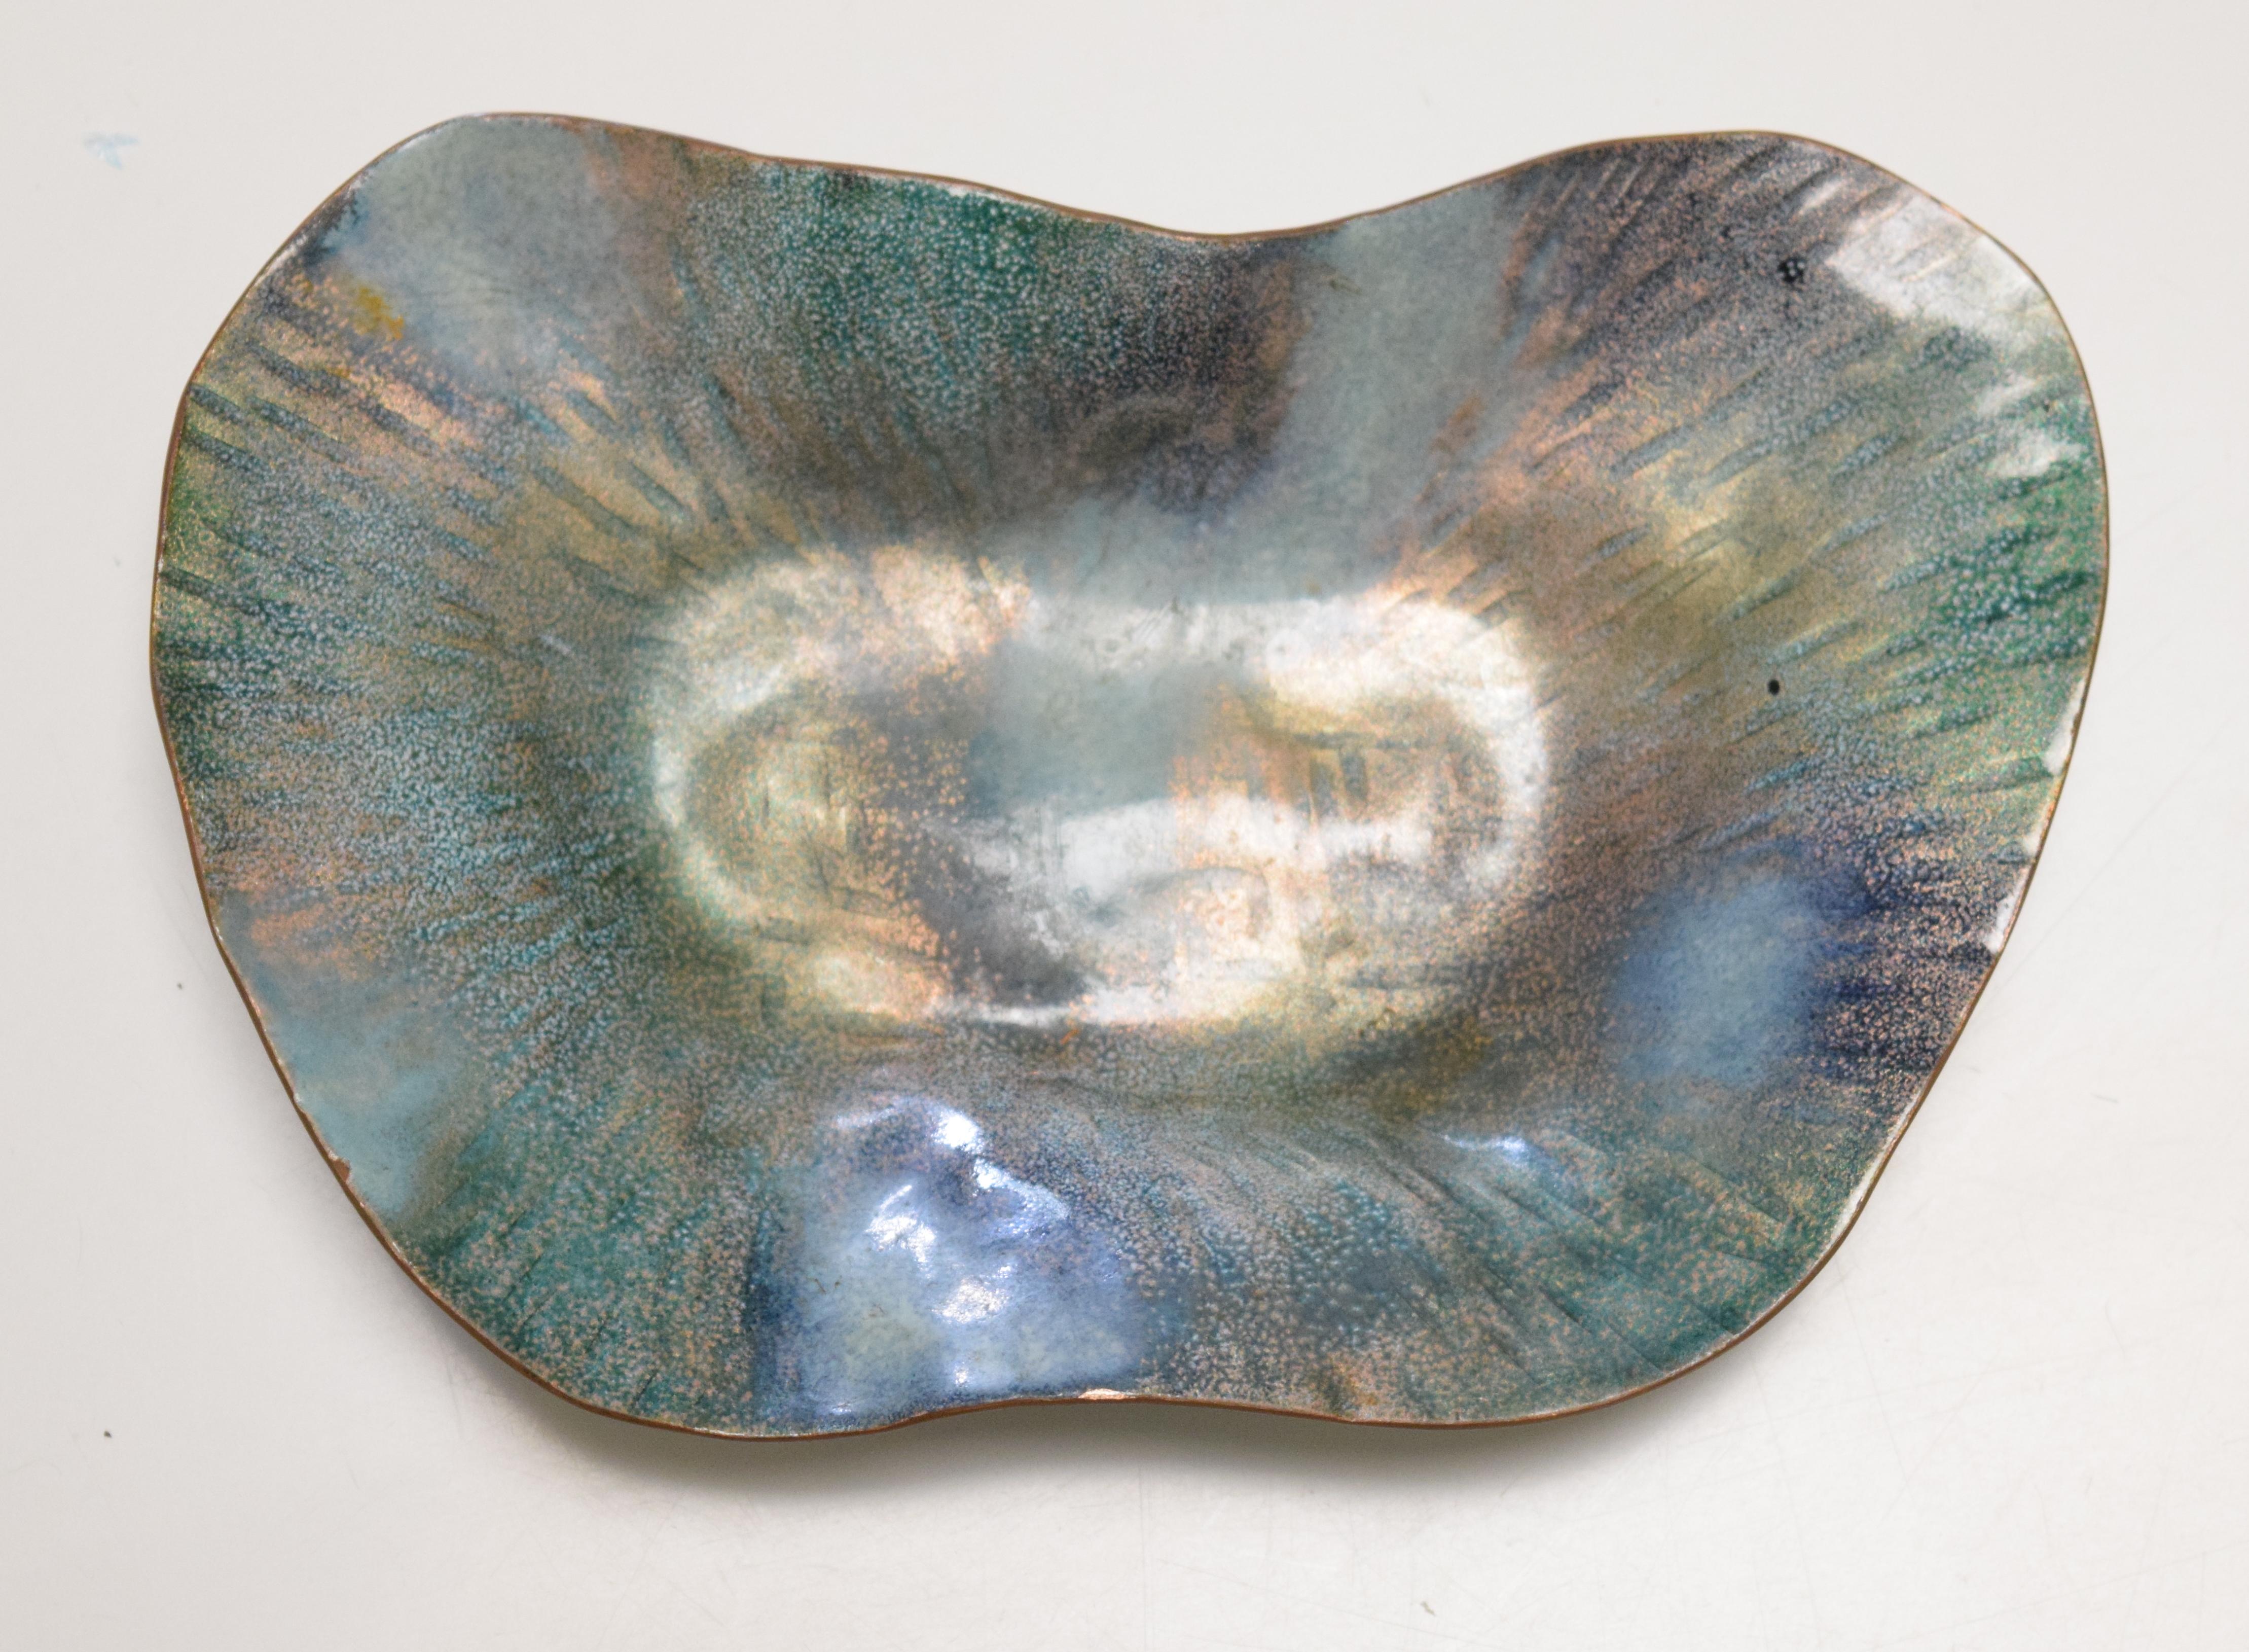 Store closing-- last day is 7/31. Offers welcome! Hand-hammered and fire-enameled copper dish executed in gauzy layers of blue, gold, green, and purple. Signed with Paolo De Poli label to reverse.